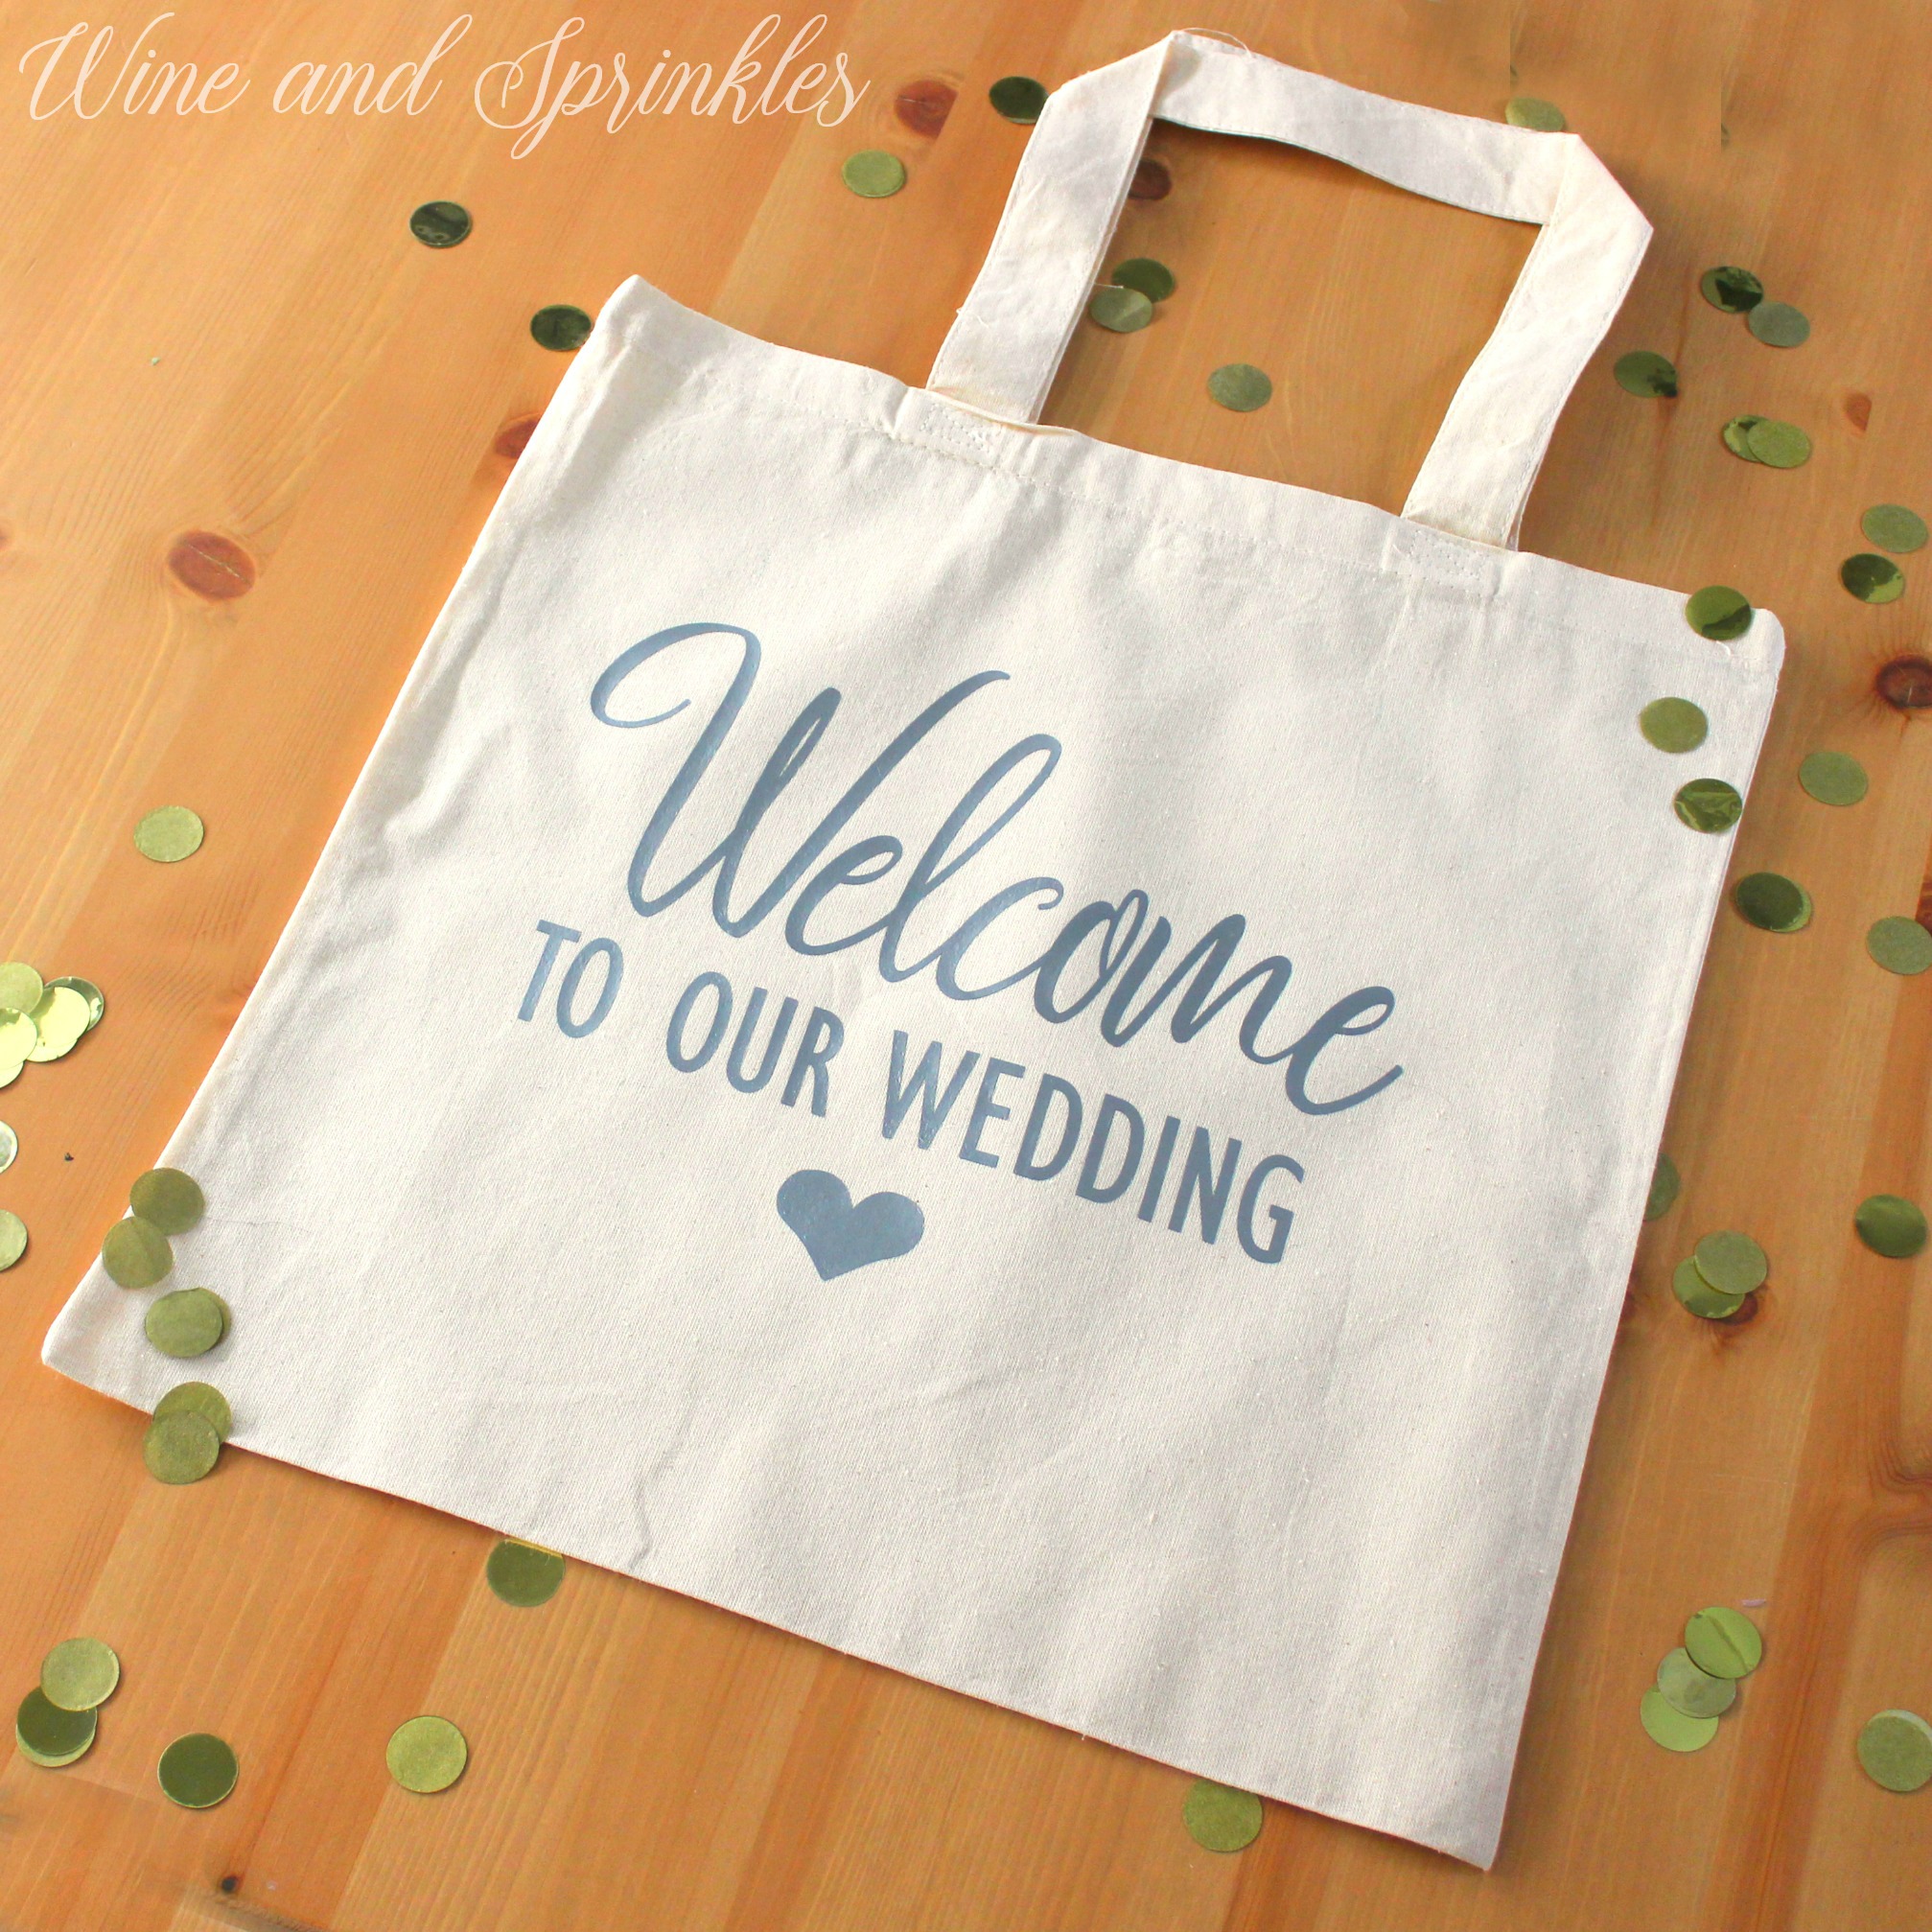 DIY Vineyard Wedding Welcome Bag - Inspired By This